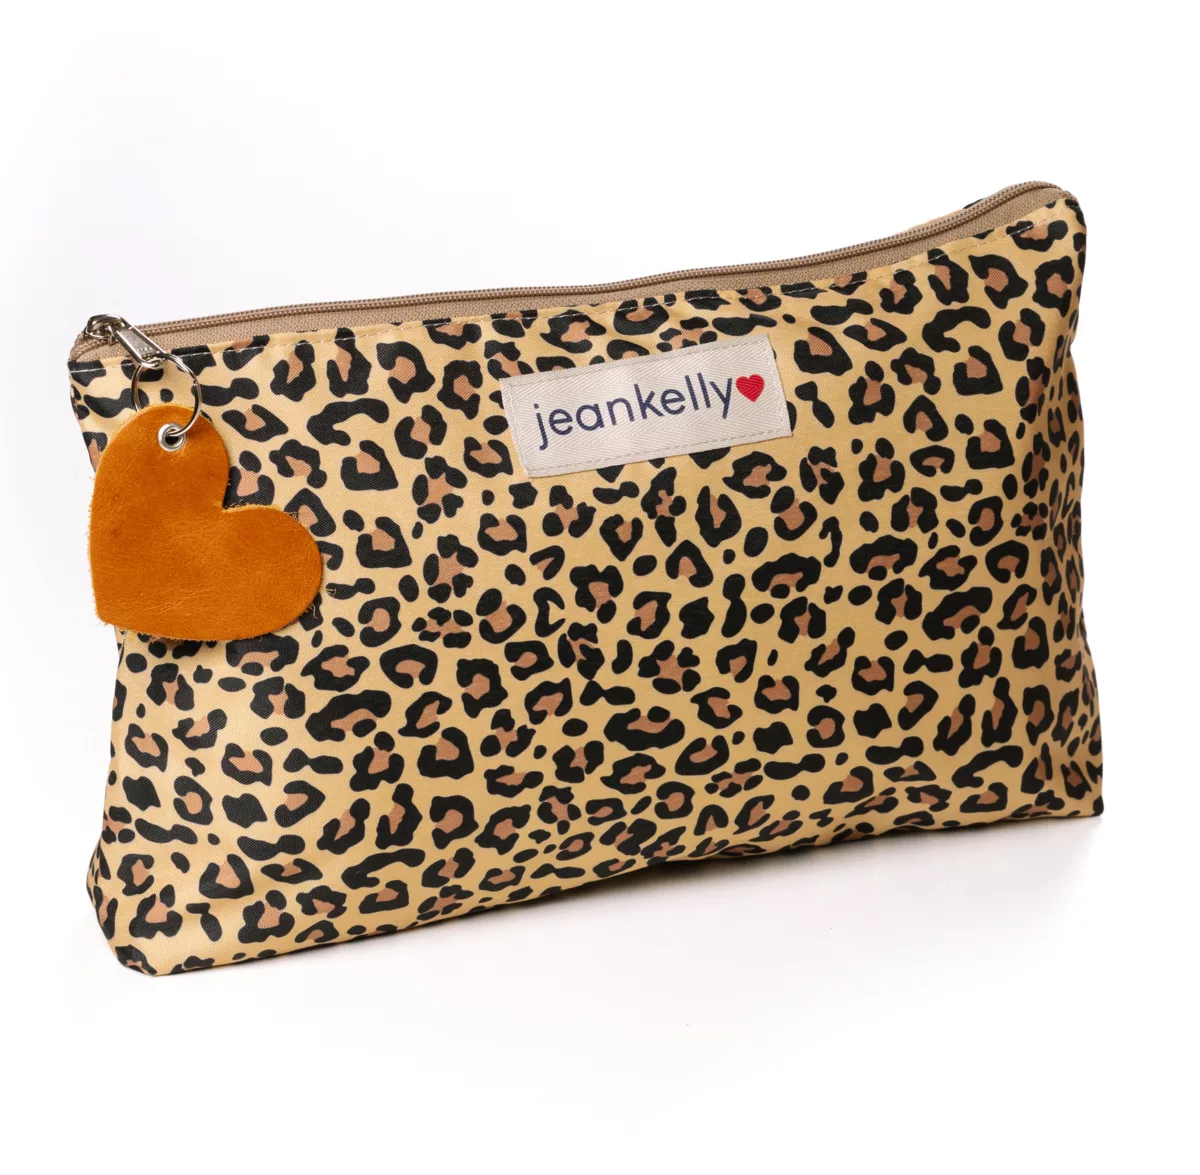 Jeankelly | Changing Pouch Leopard Print - Water Resistant